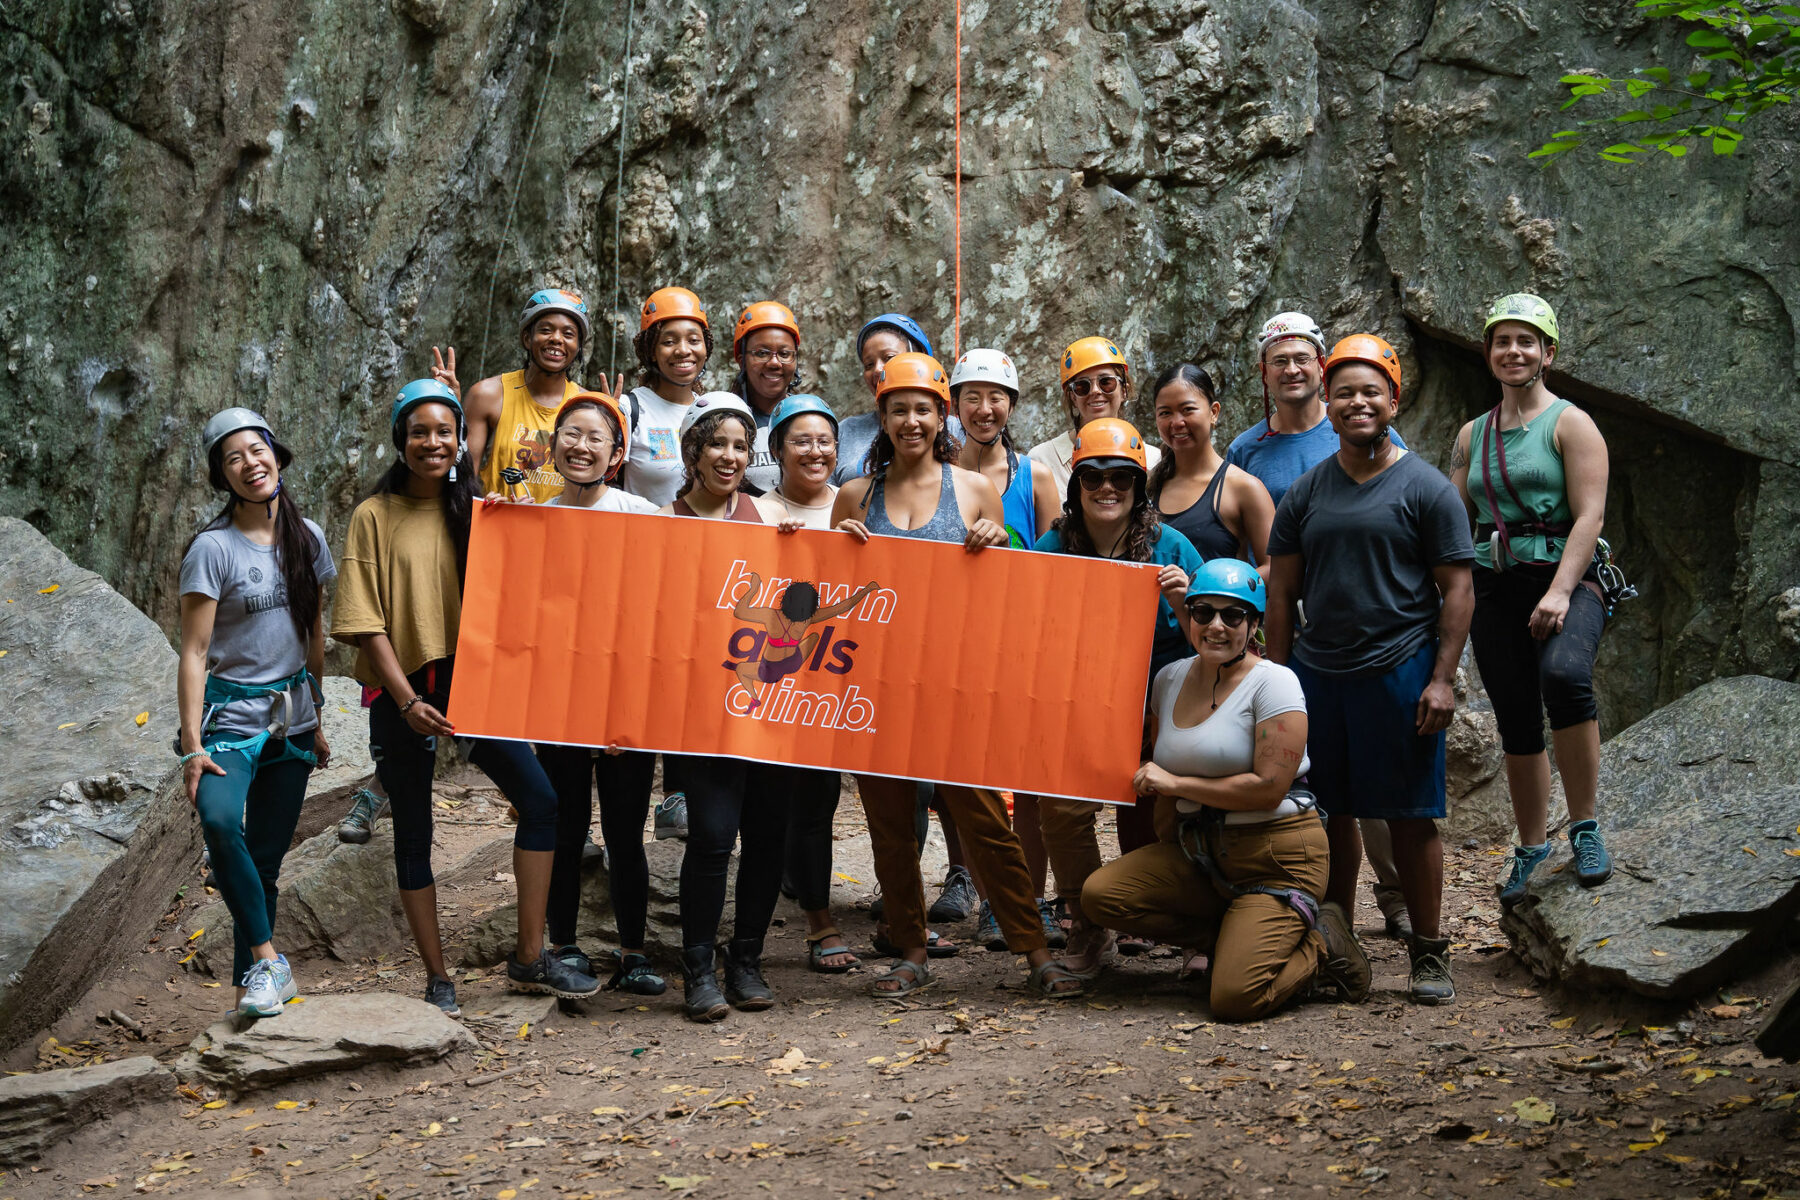 A group of climbers at a crag holding a sign that reads brown girls climb. 